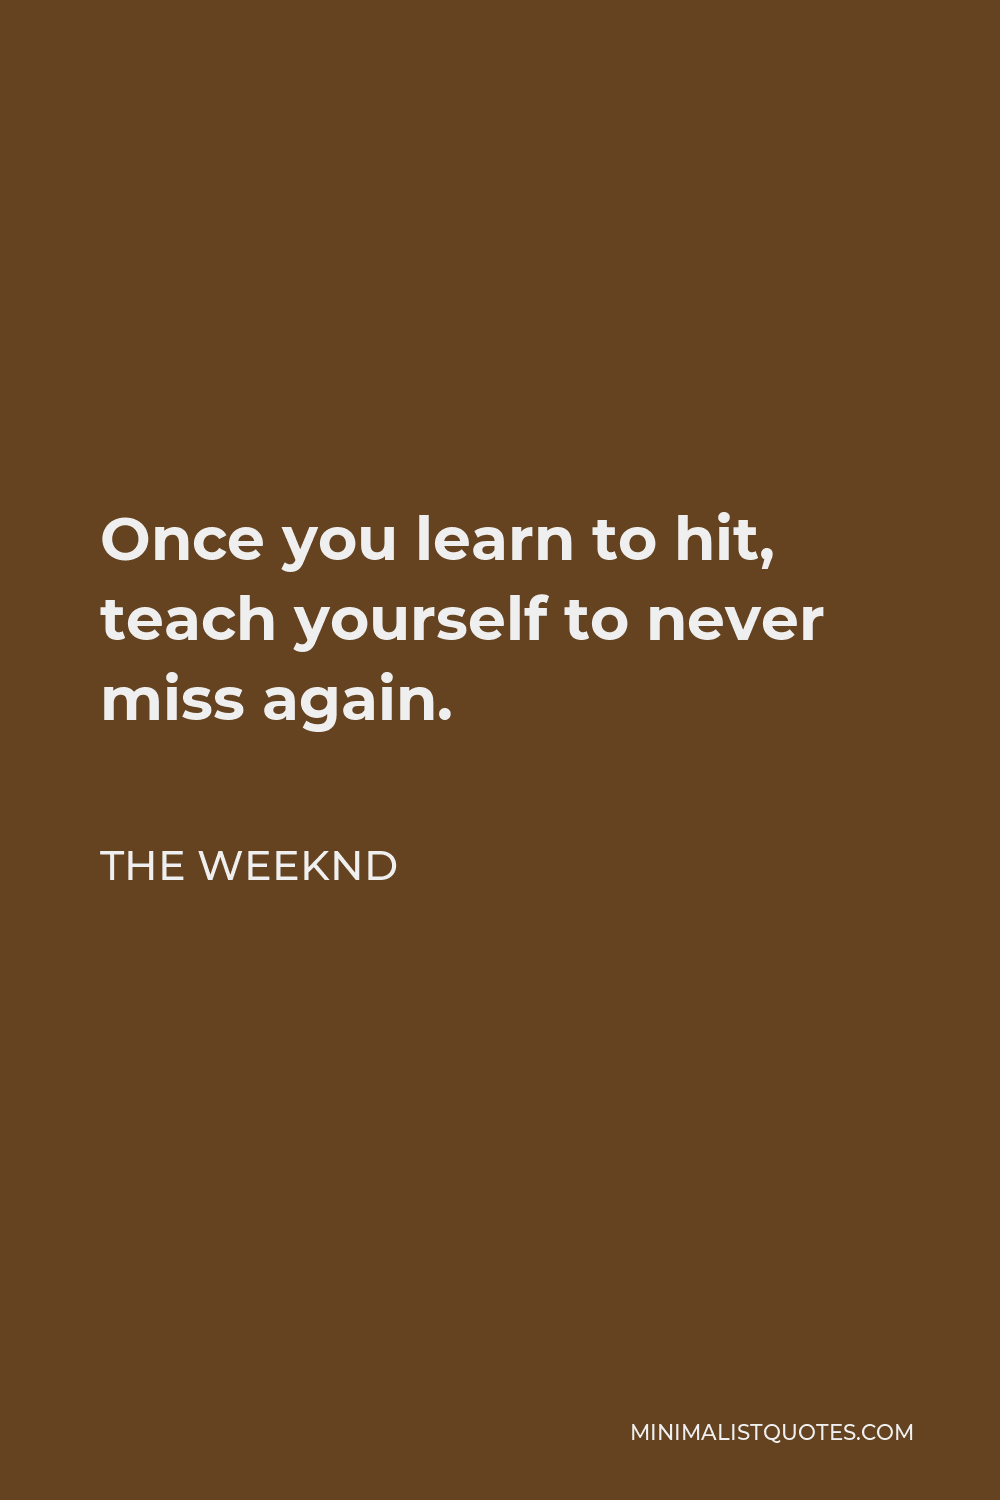 The Weeknd Quote - Once you learn to hit, teach yourself to never miss again.